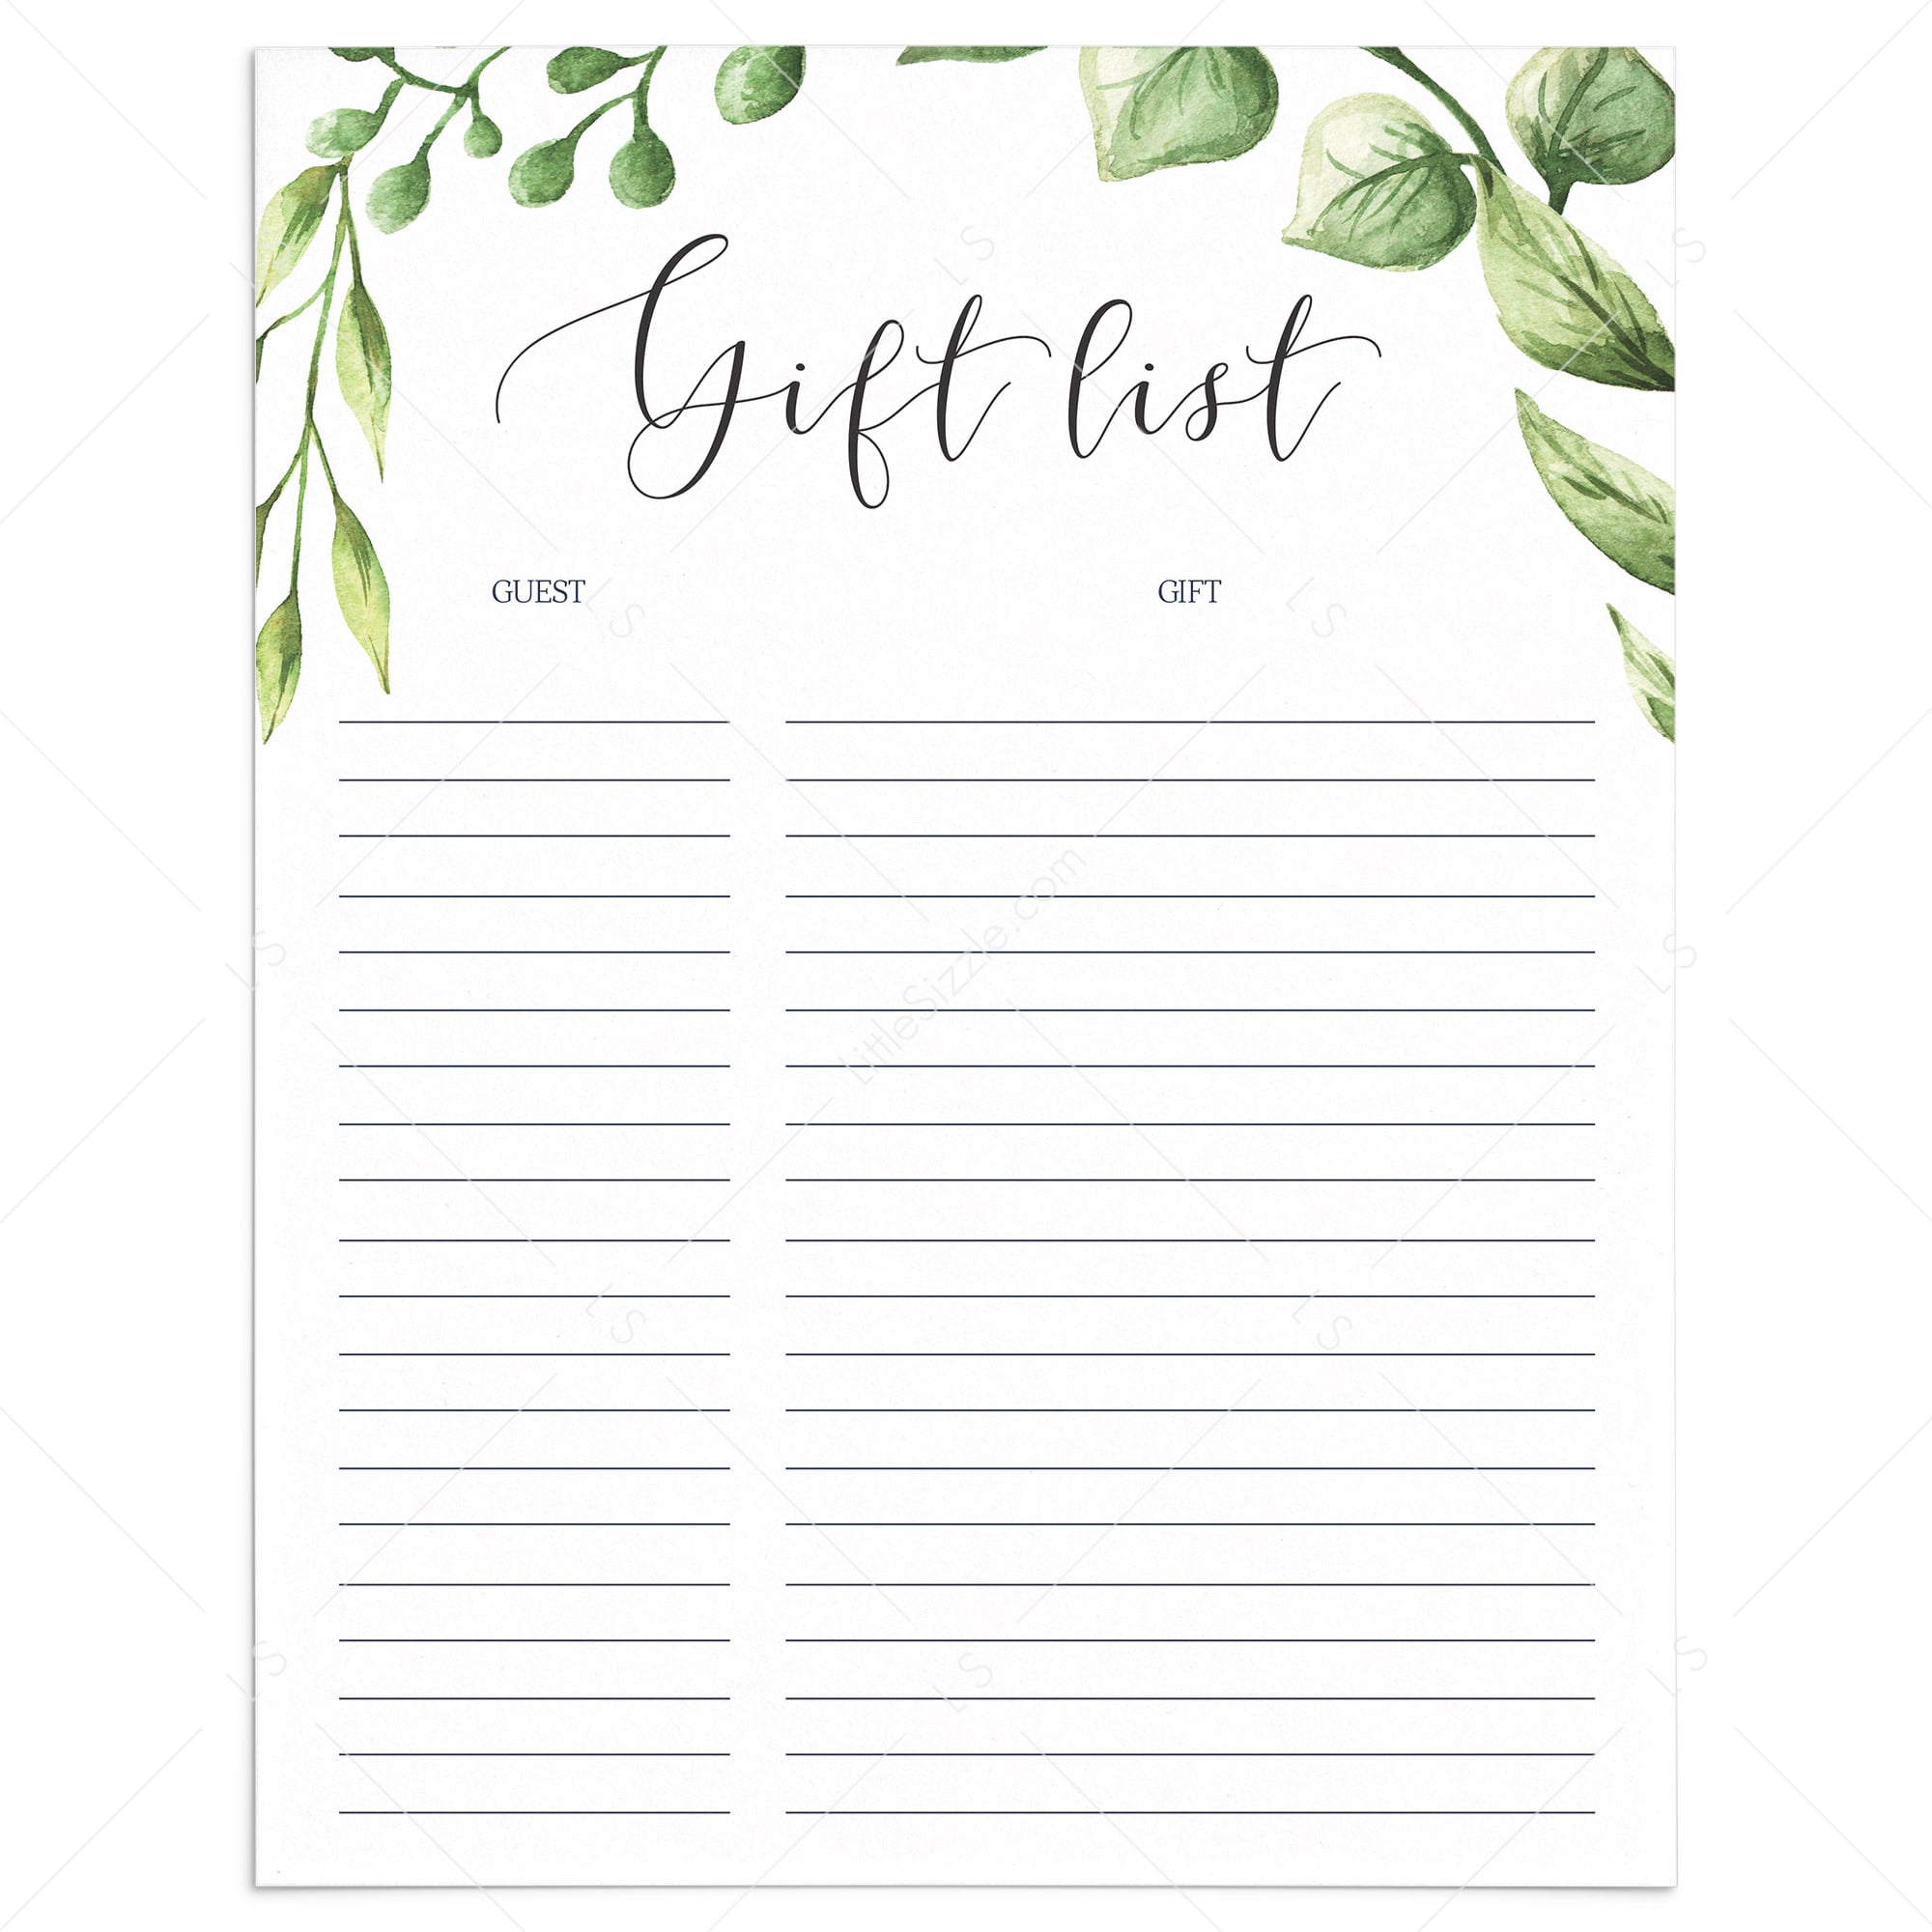 Gift list printable instant download with green leaves by LittleSizzle